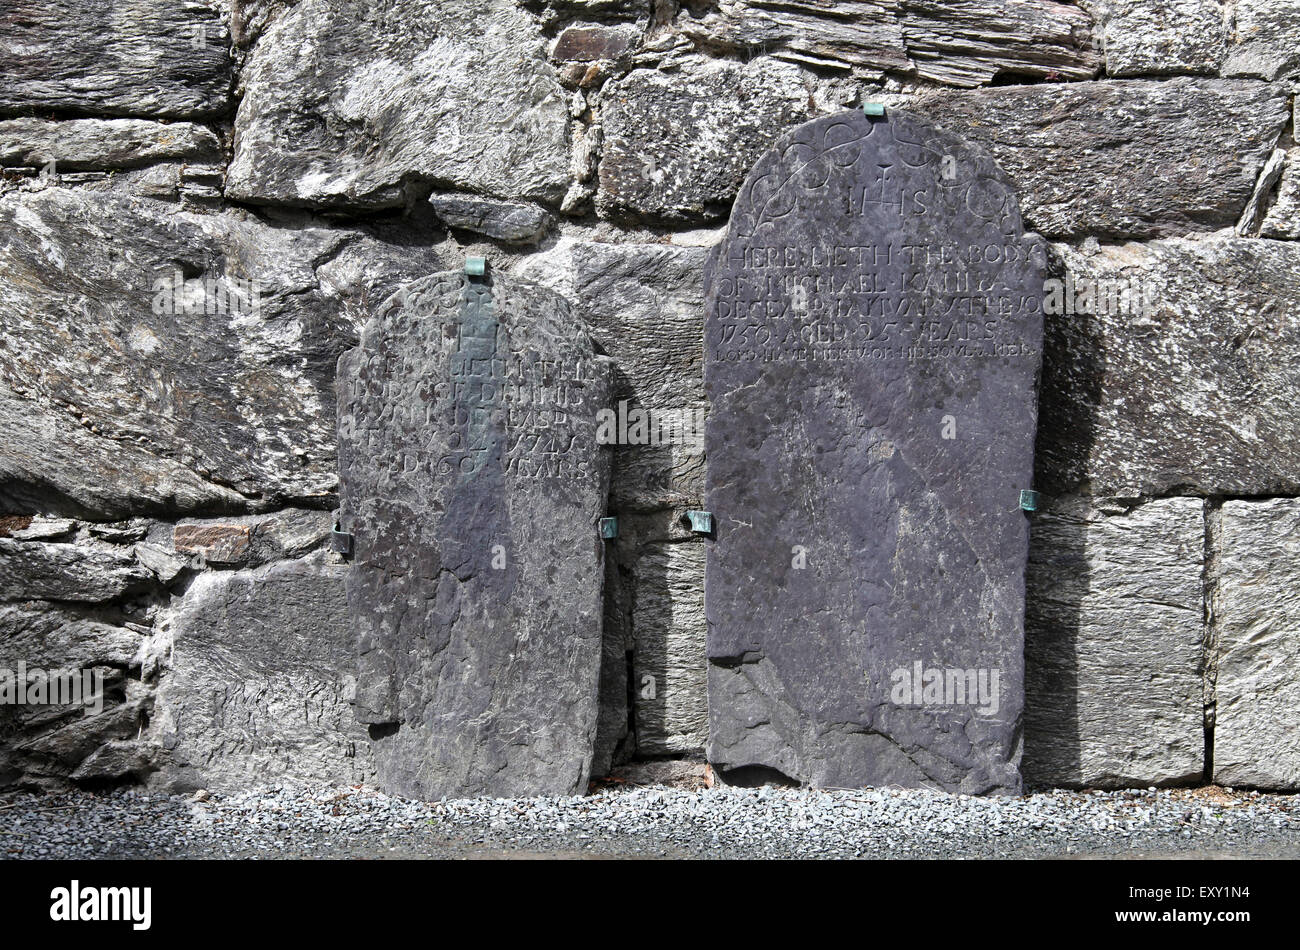 Detail of the ruined Cathedral of St Peter and St Paul at Glendalough Monastic Site in County Wicklow Stock Photo